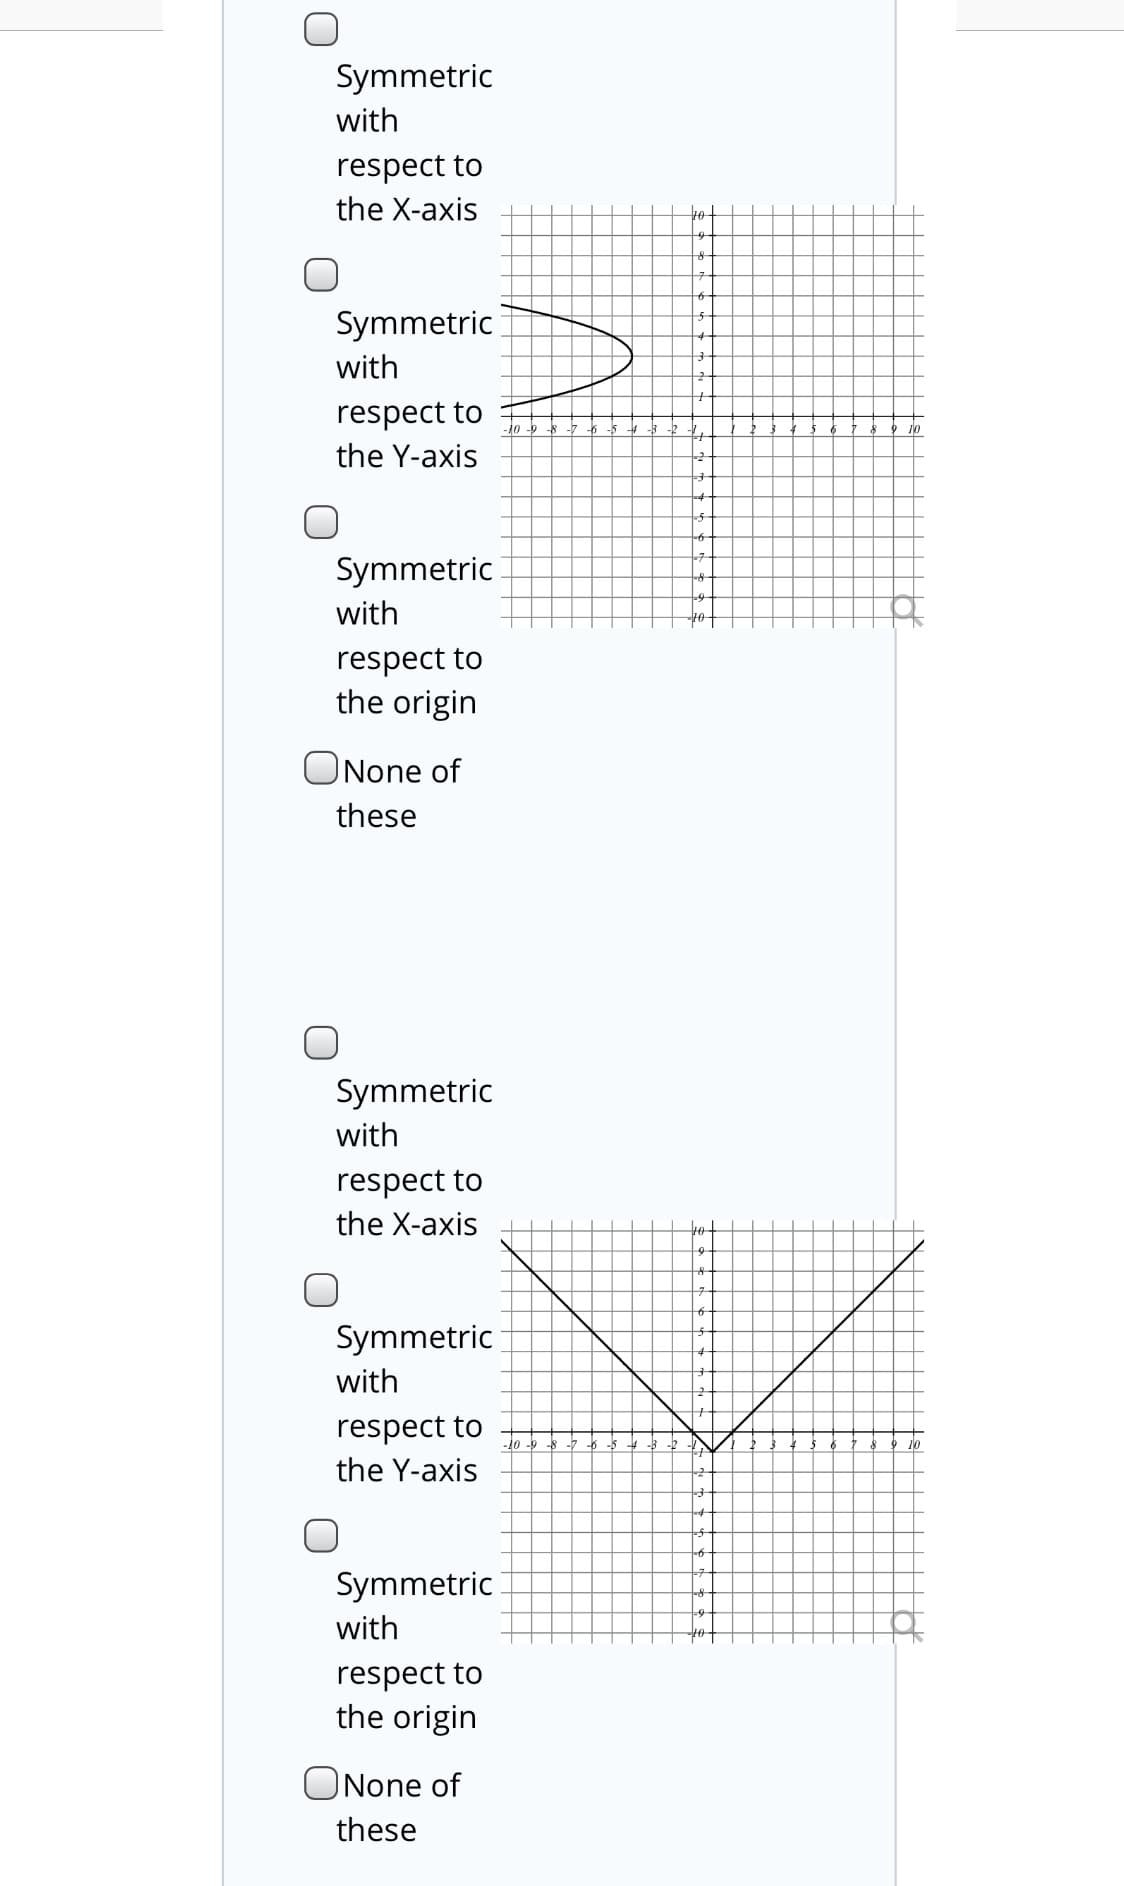 Symmetric
with
respect to
the X-axis
Symmetric
with
respect to
the Y-axis
-40-
10
Symmetric
with
respect to
the origin
ONone of
these
Symmetric
with
respect to
the X-axis
Symmetric
with
respect to
the Y-axis
Symmetric
with
respect to
the origin
ONone of
these
